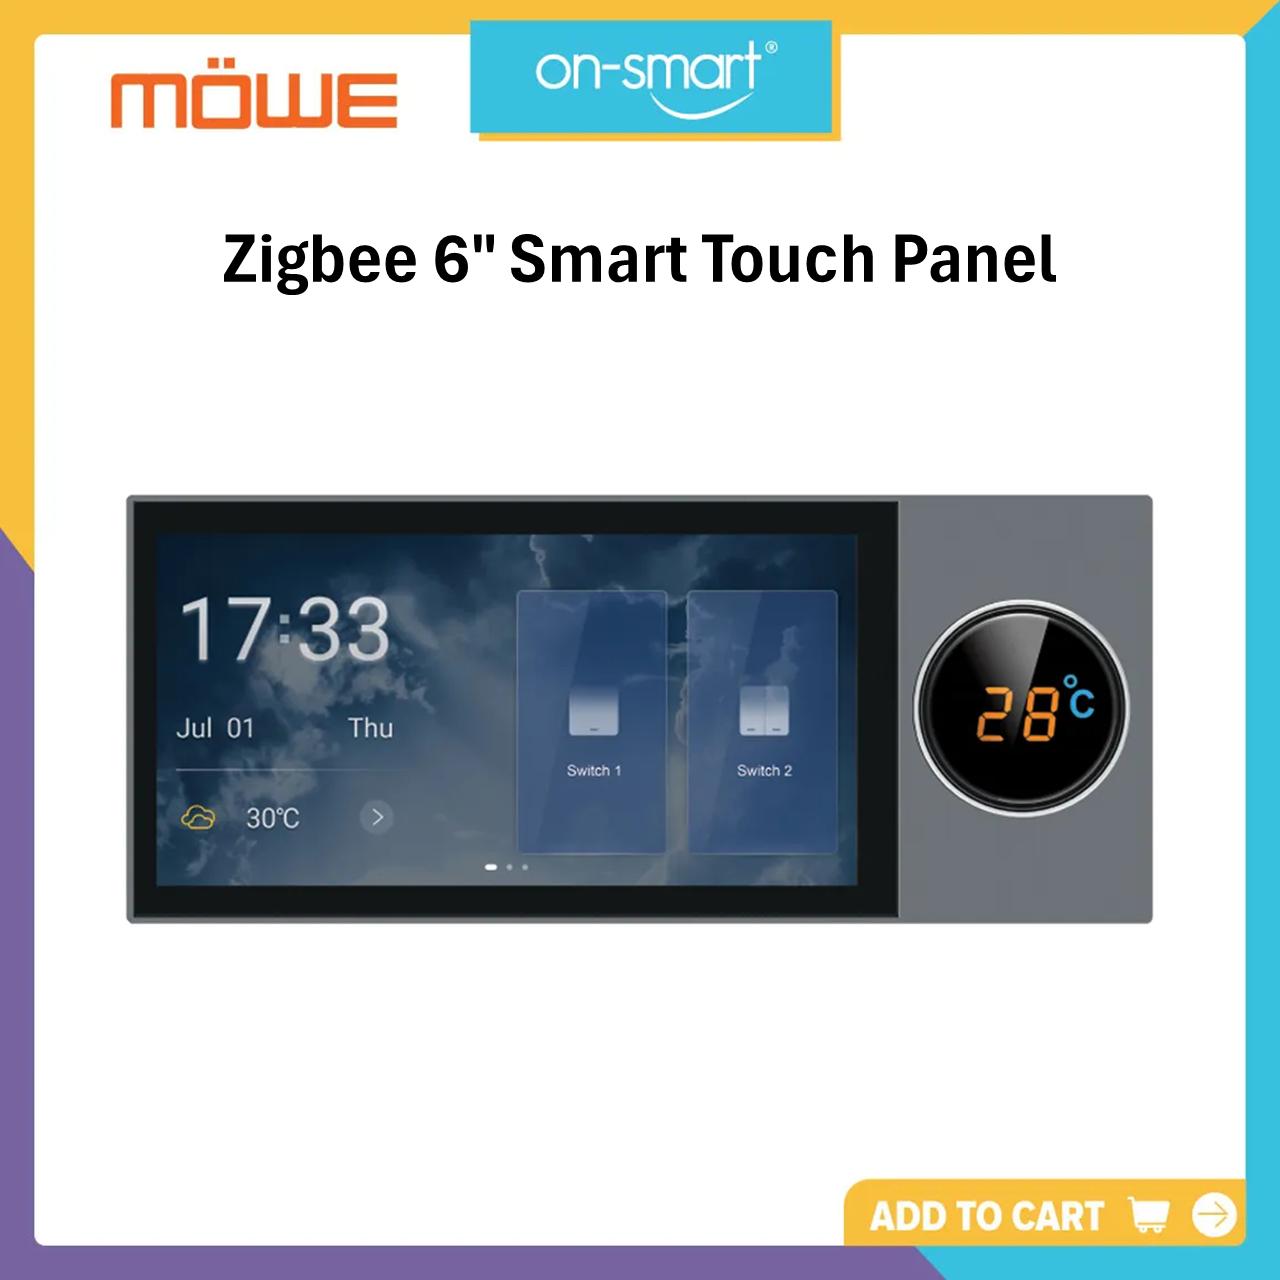 MOWE 6-inch Smart Touch Panel